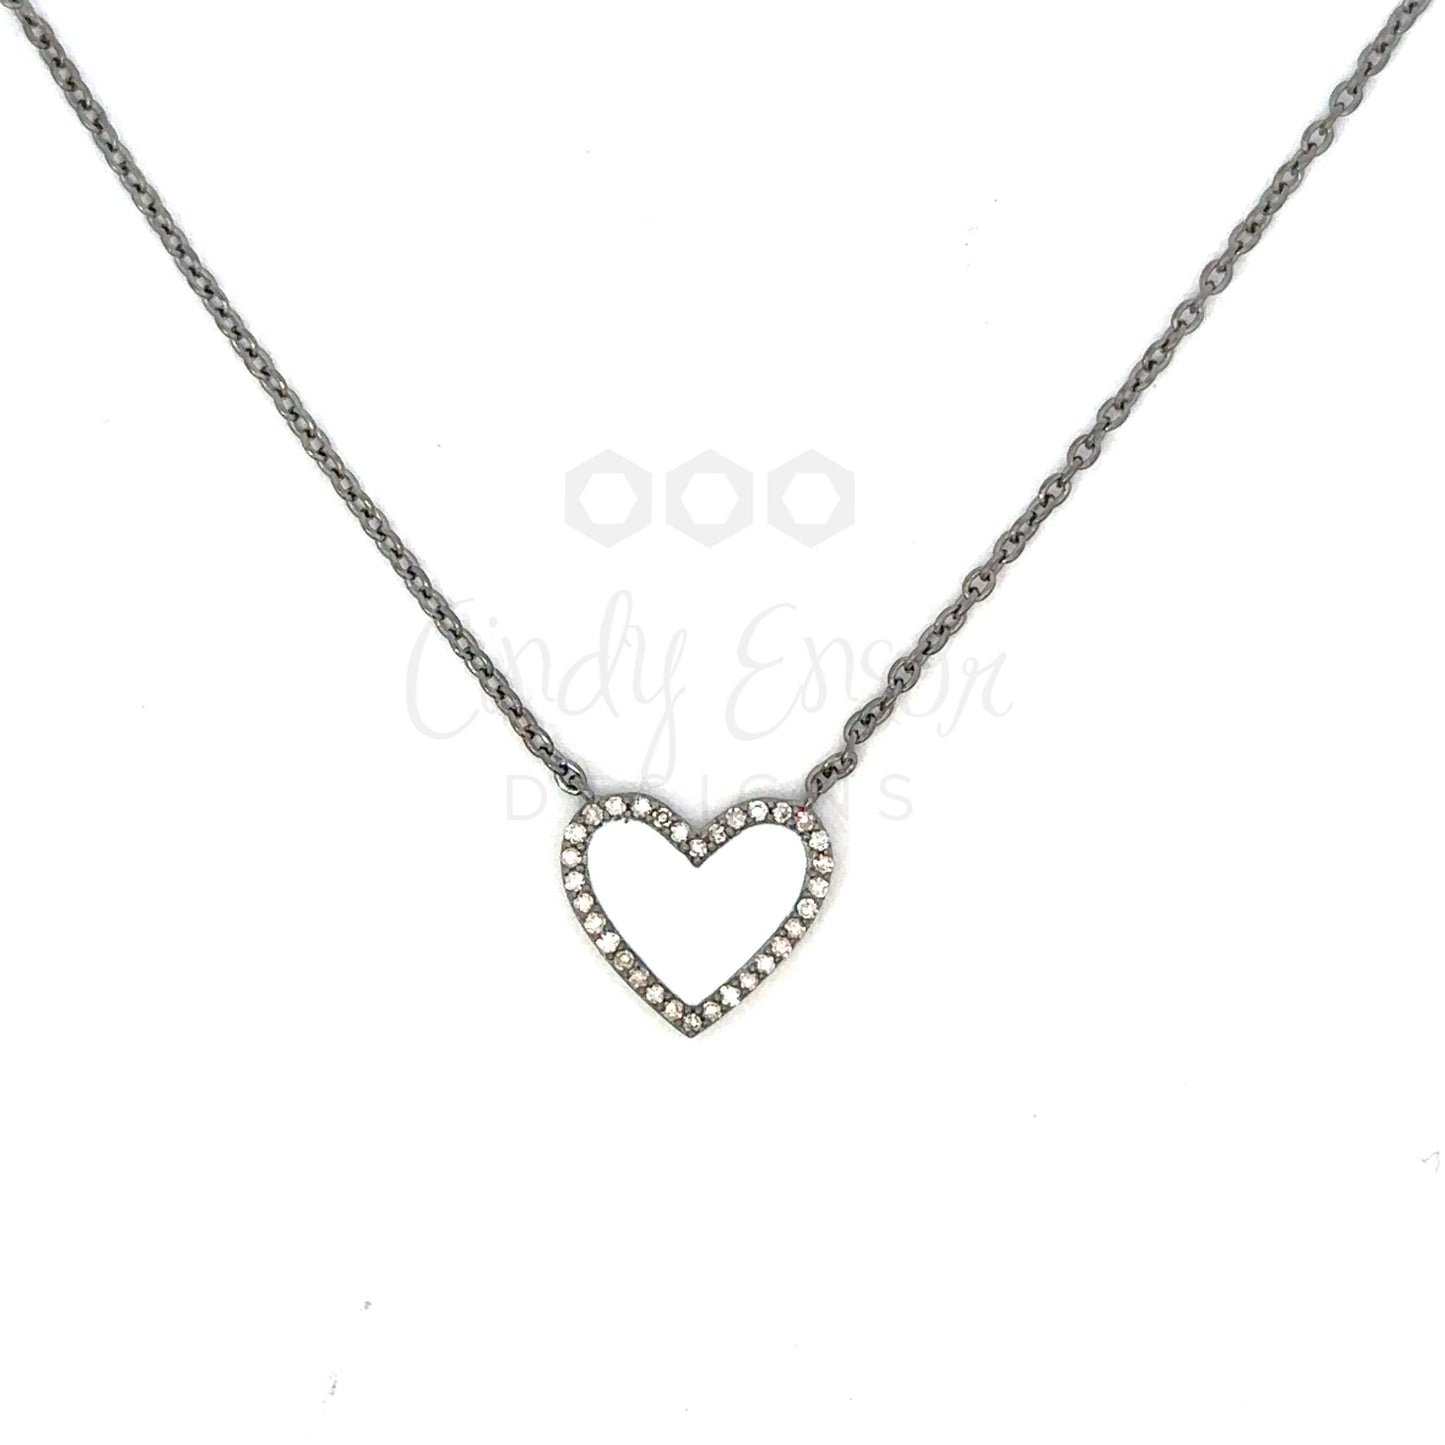 Enamel Heart Necklace with Pave Diamond Border